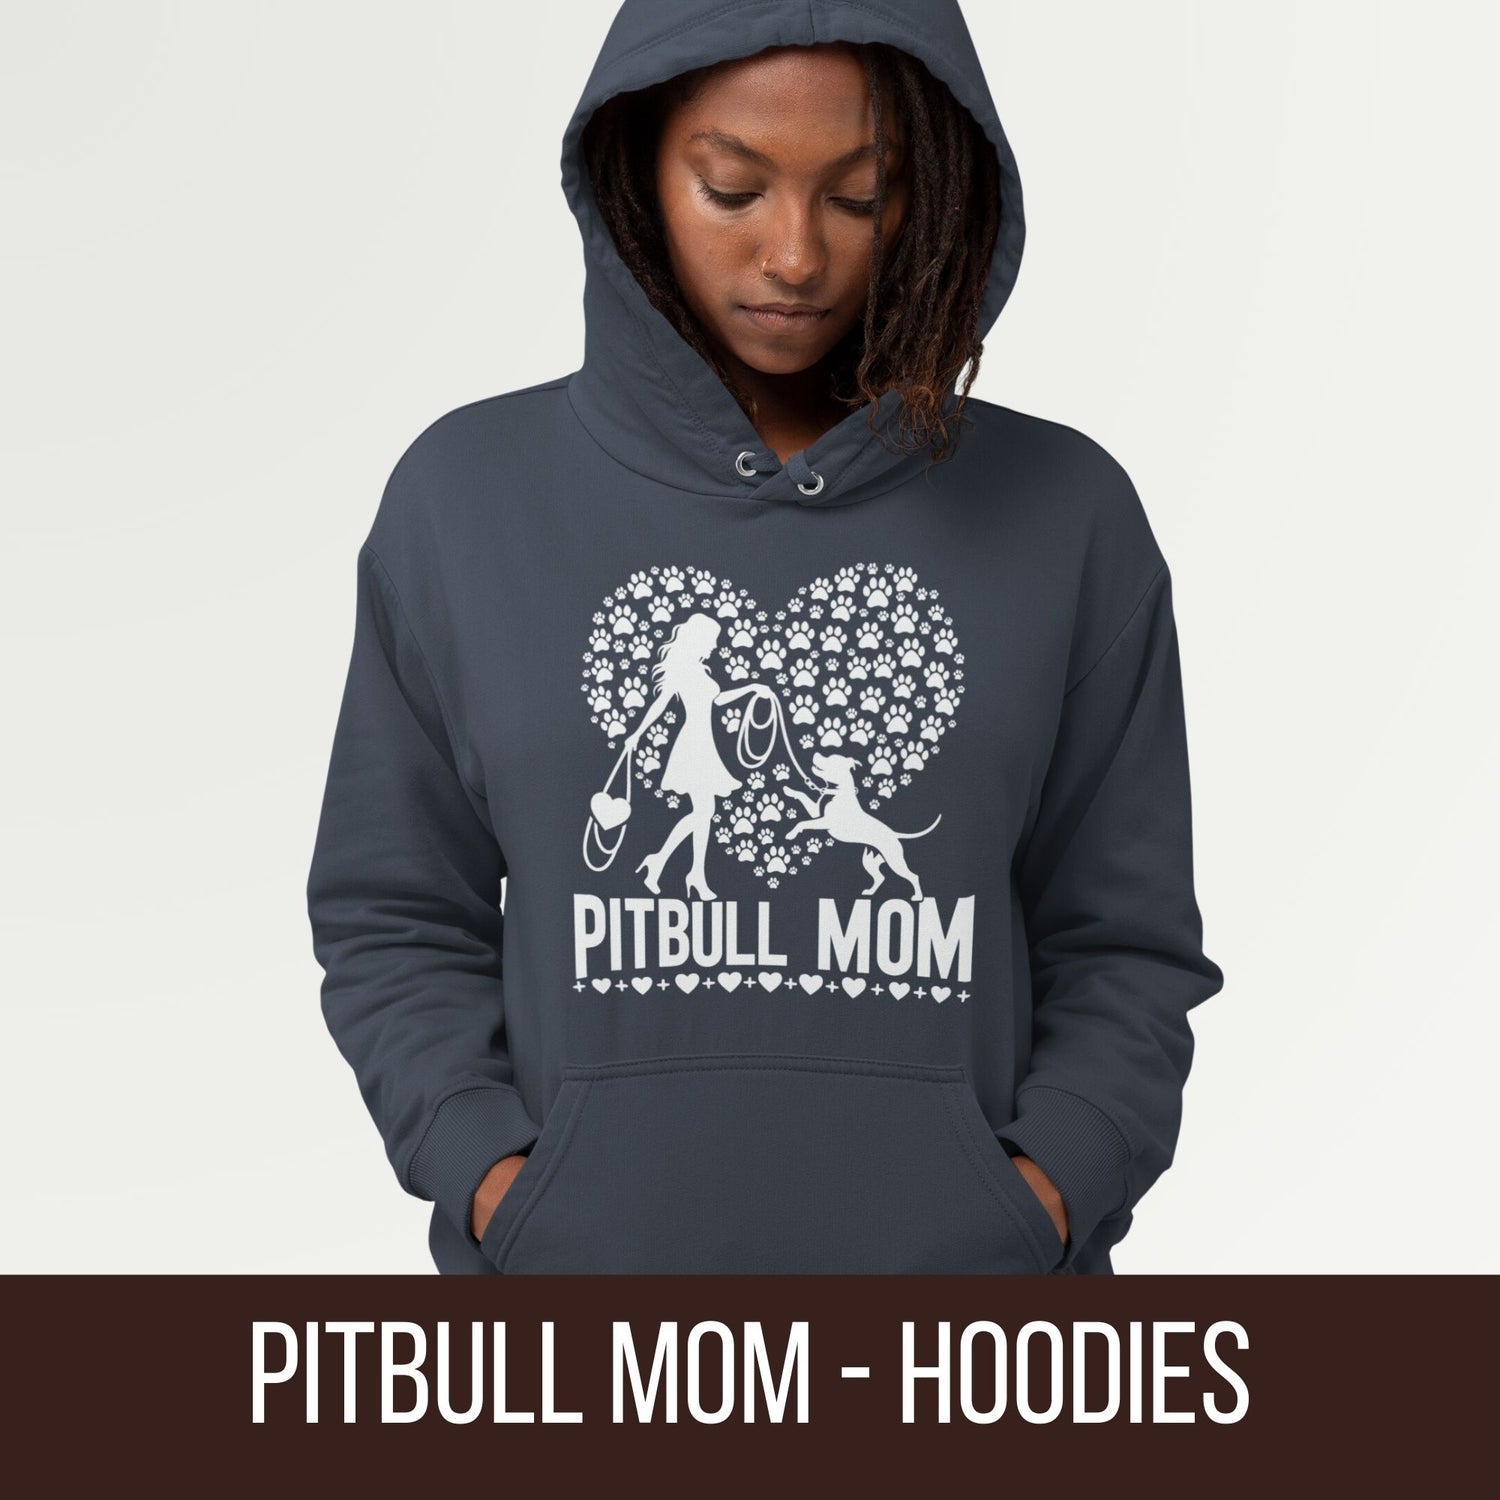 Pitbull Mom Hoodies - Comfort with a Cause